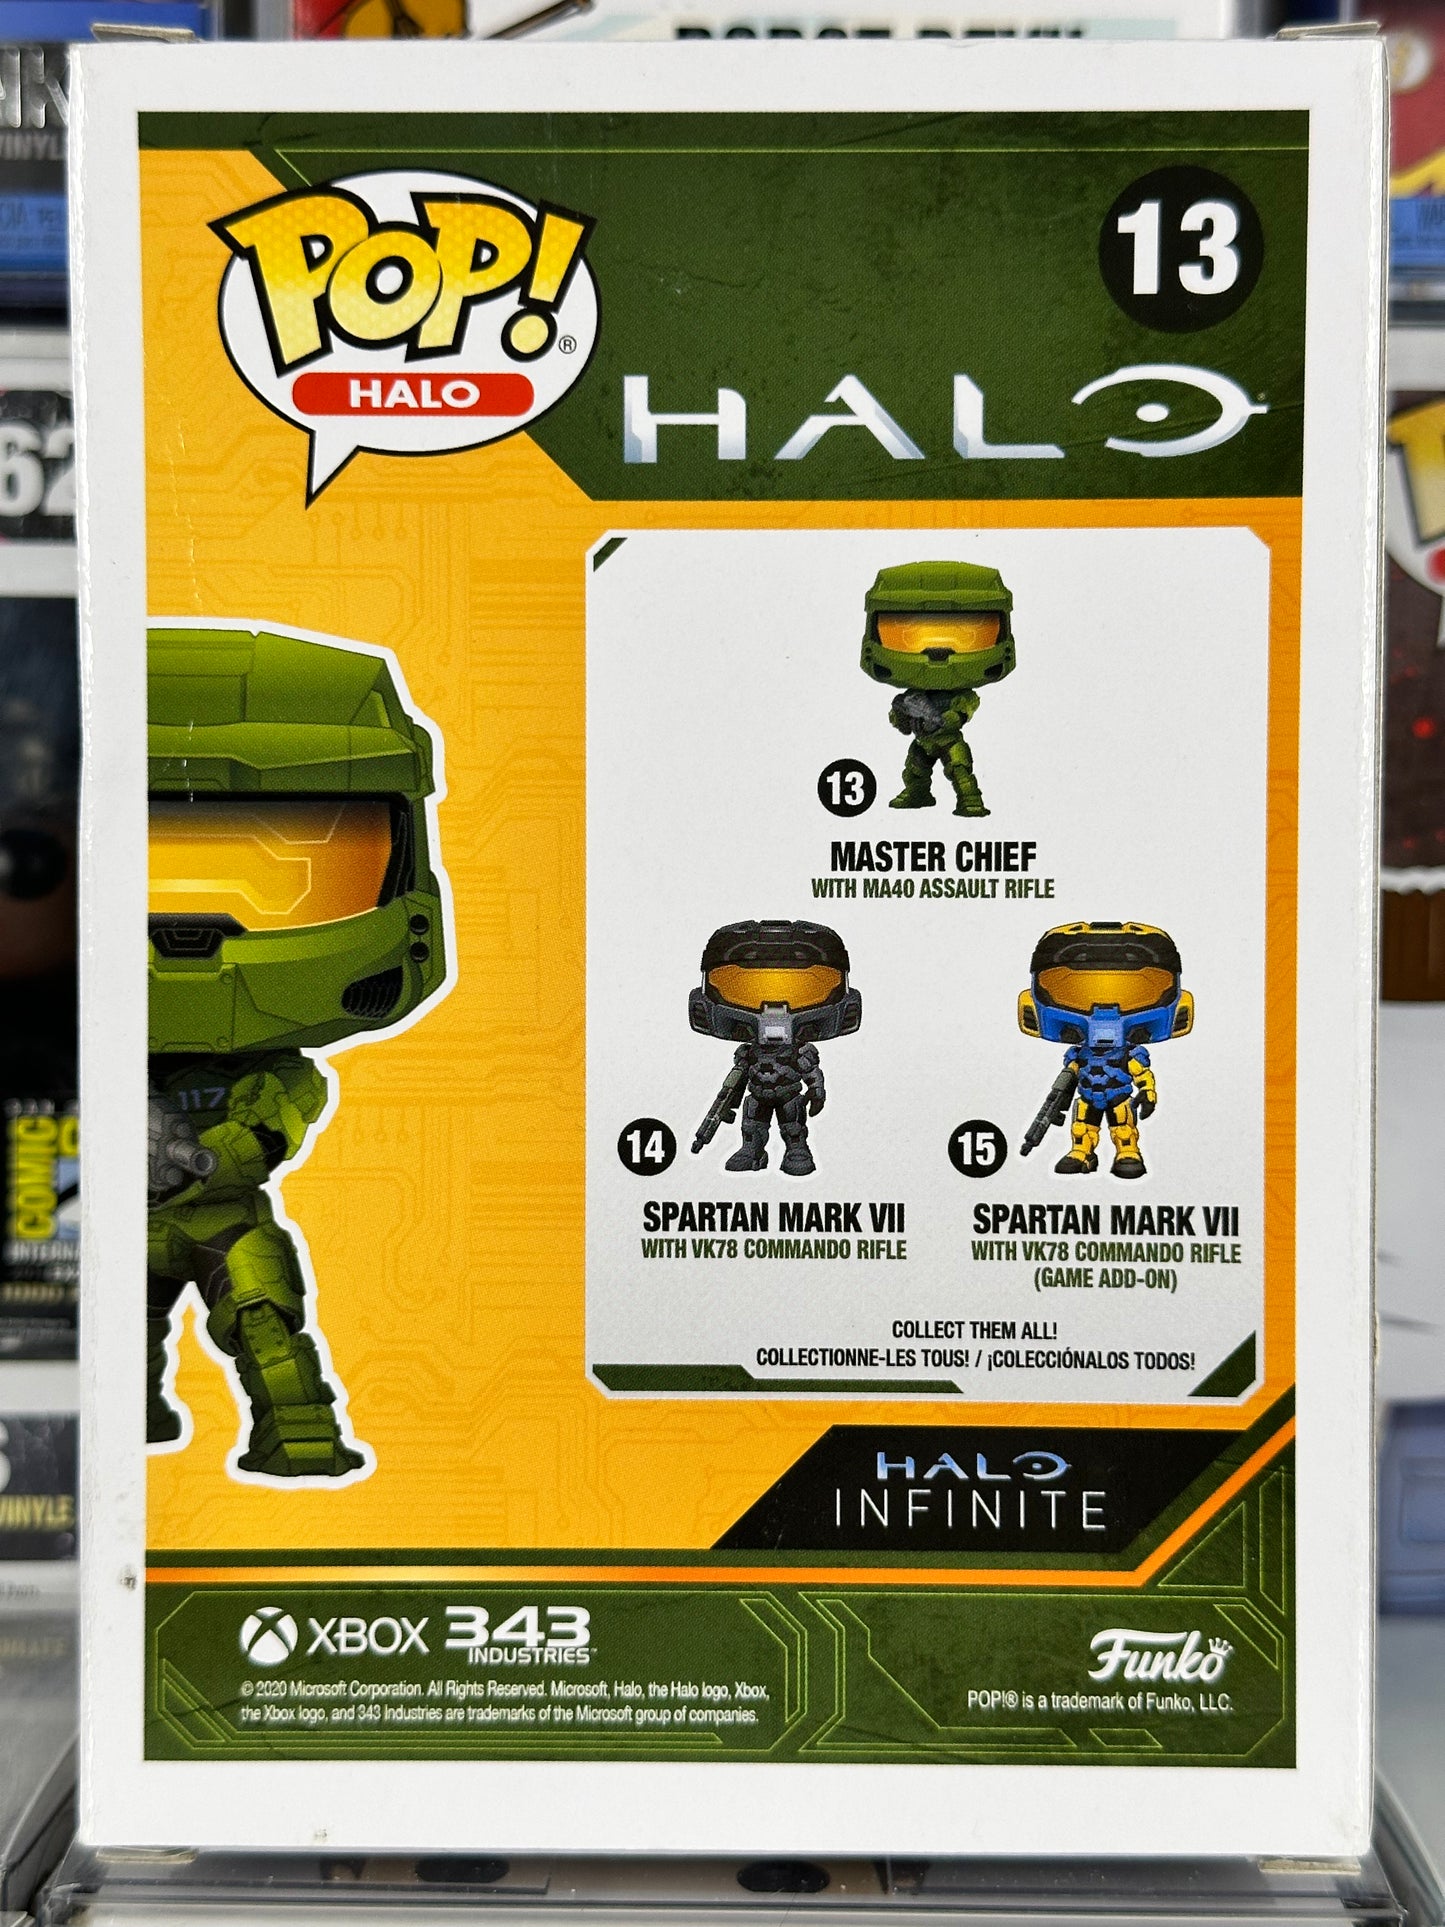 Halo - Master Chief with MA40 Assault Rifle (13)